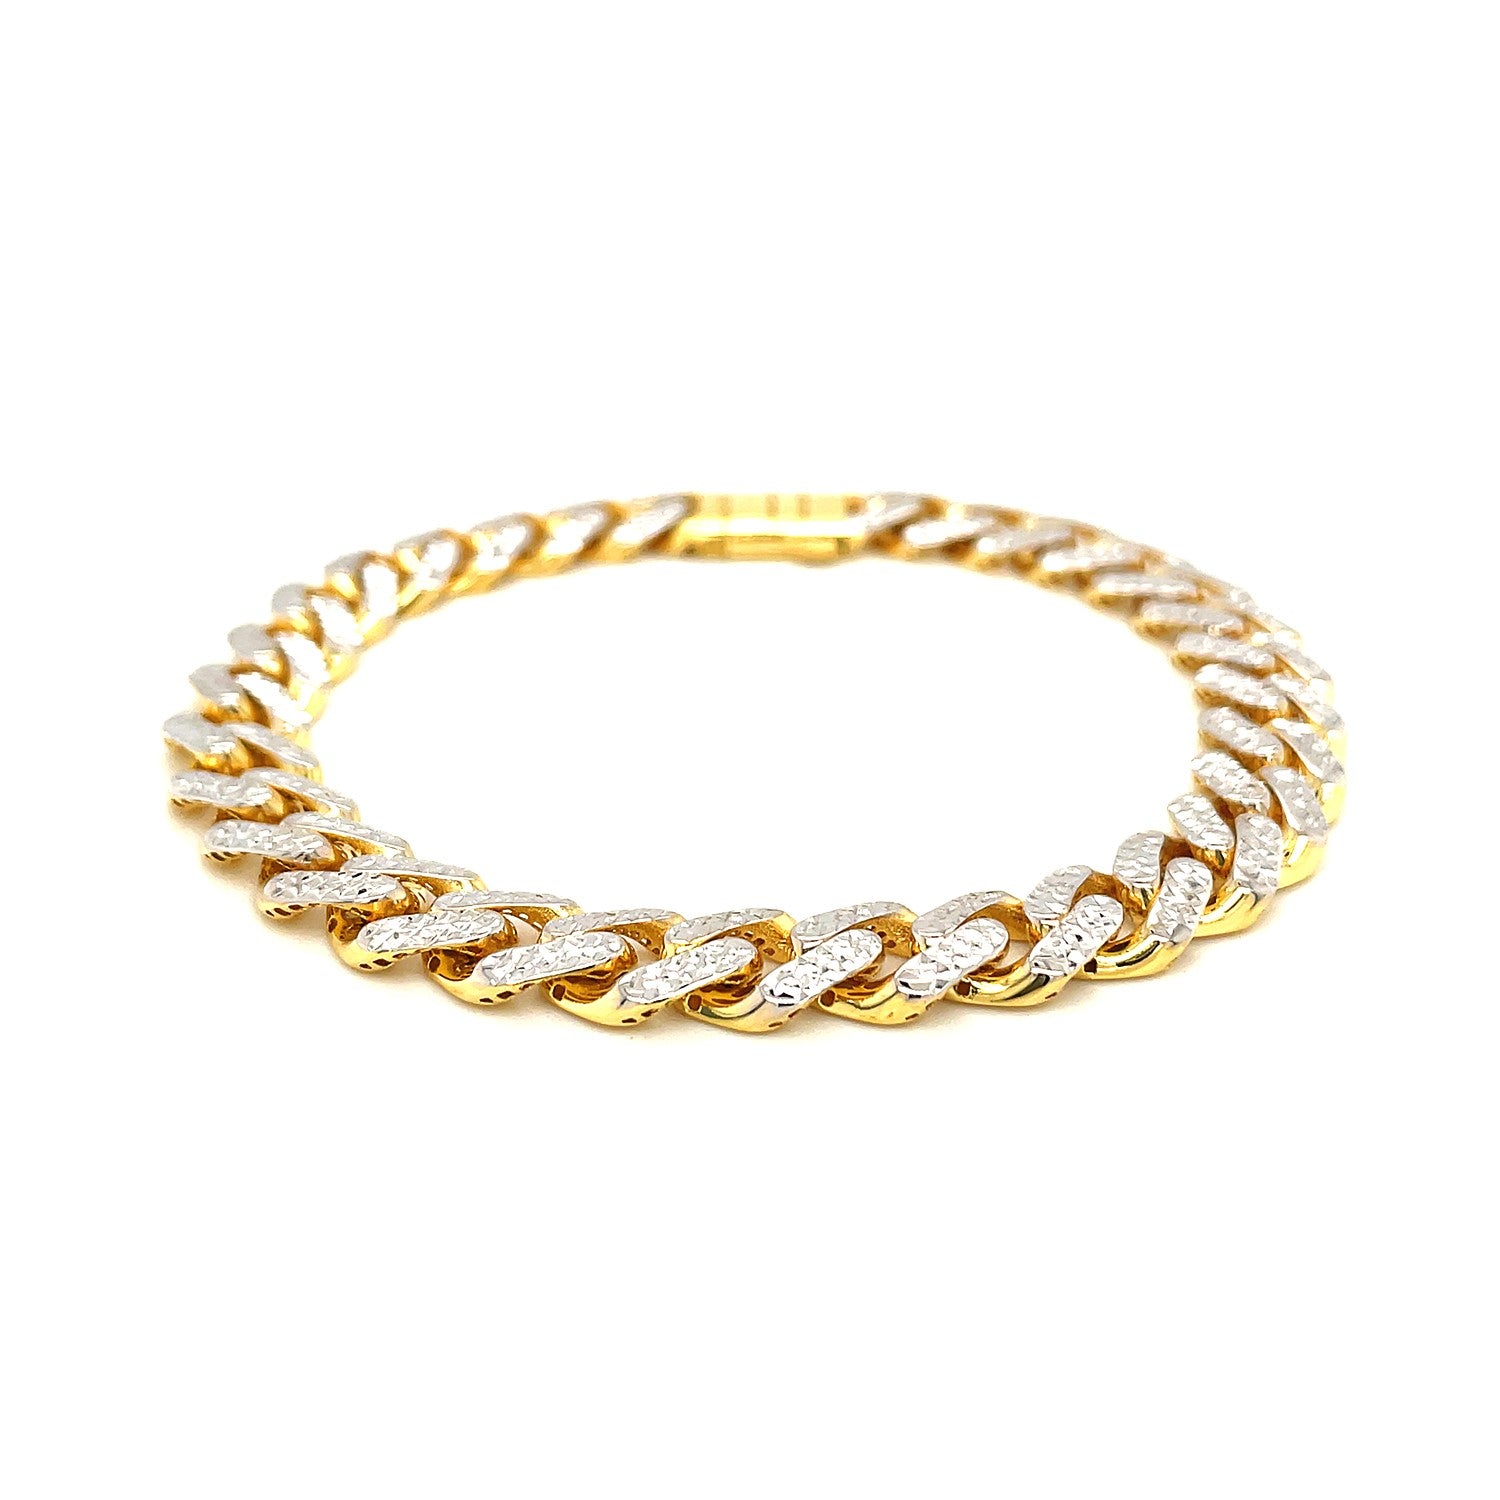 14k Two Tone Gold 8 1/4 inch Curb Chain Bracelet with White Pave